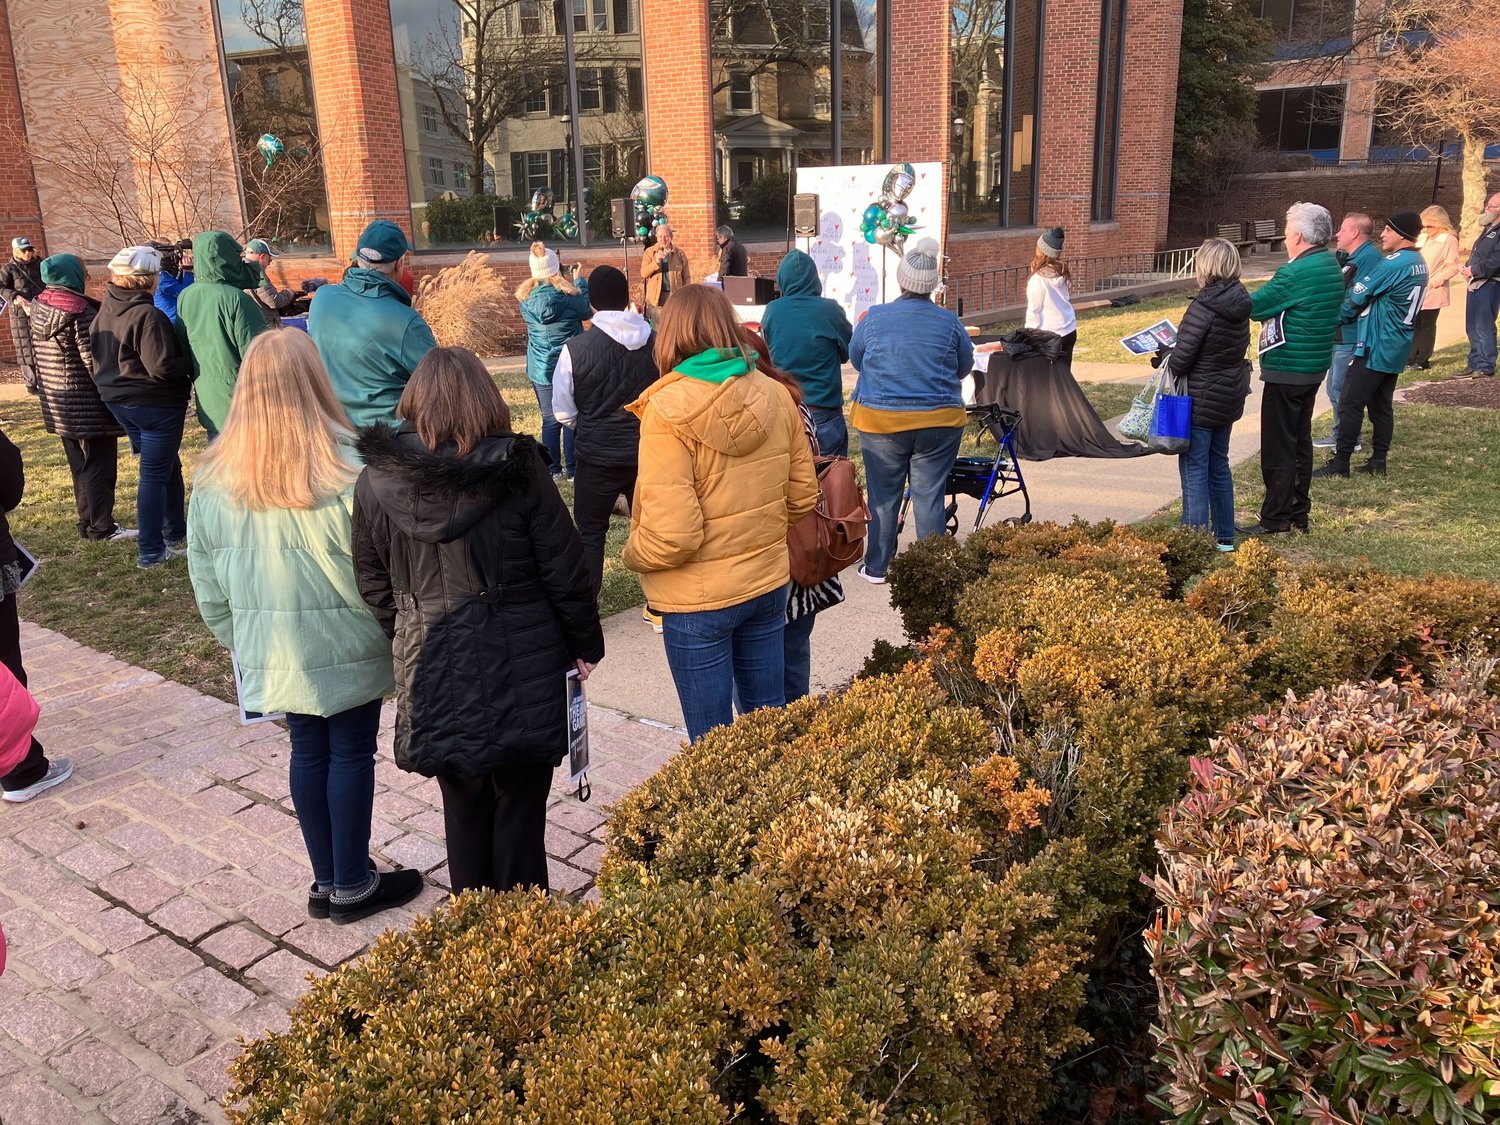 Birds fans gathered at the Old County Courthouse Lawn at Court and Main streets in Doylestown for “The Herald’s Road to the Big Game Pep Rally” Friday, Jan. 27, 2023.